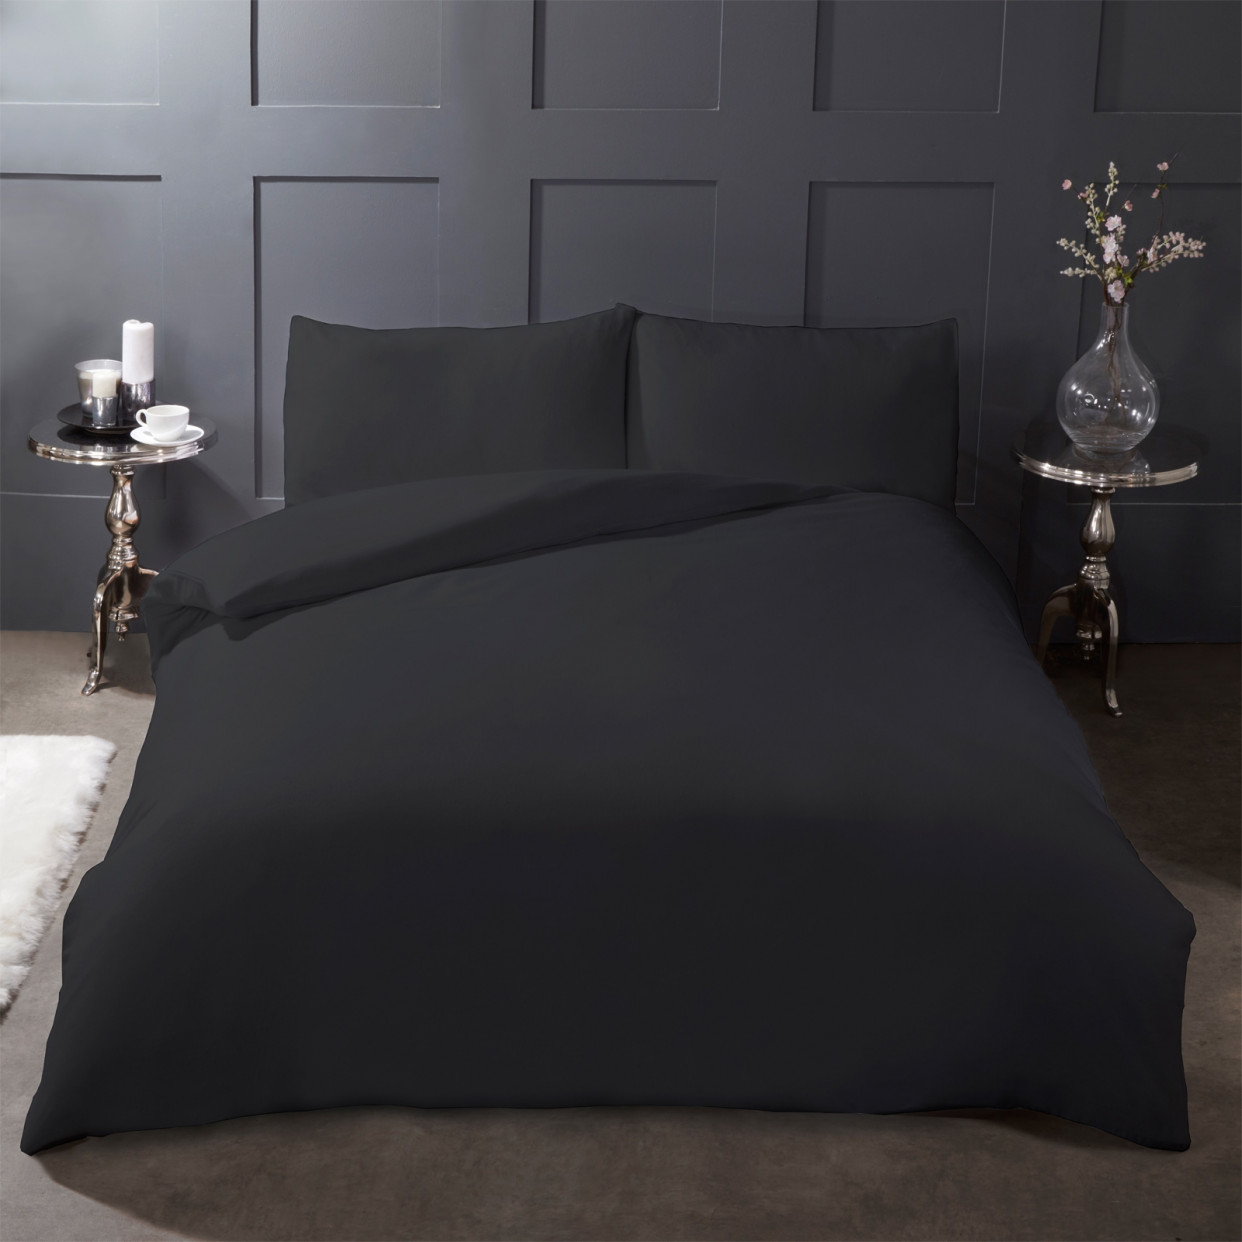 Highams 100% Brushed Cotton Duvet Cover with Pillowcase Flannelette Thermal Bedding Set, Plain Charcoal Black - Superking>